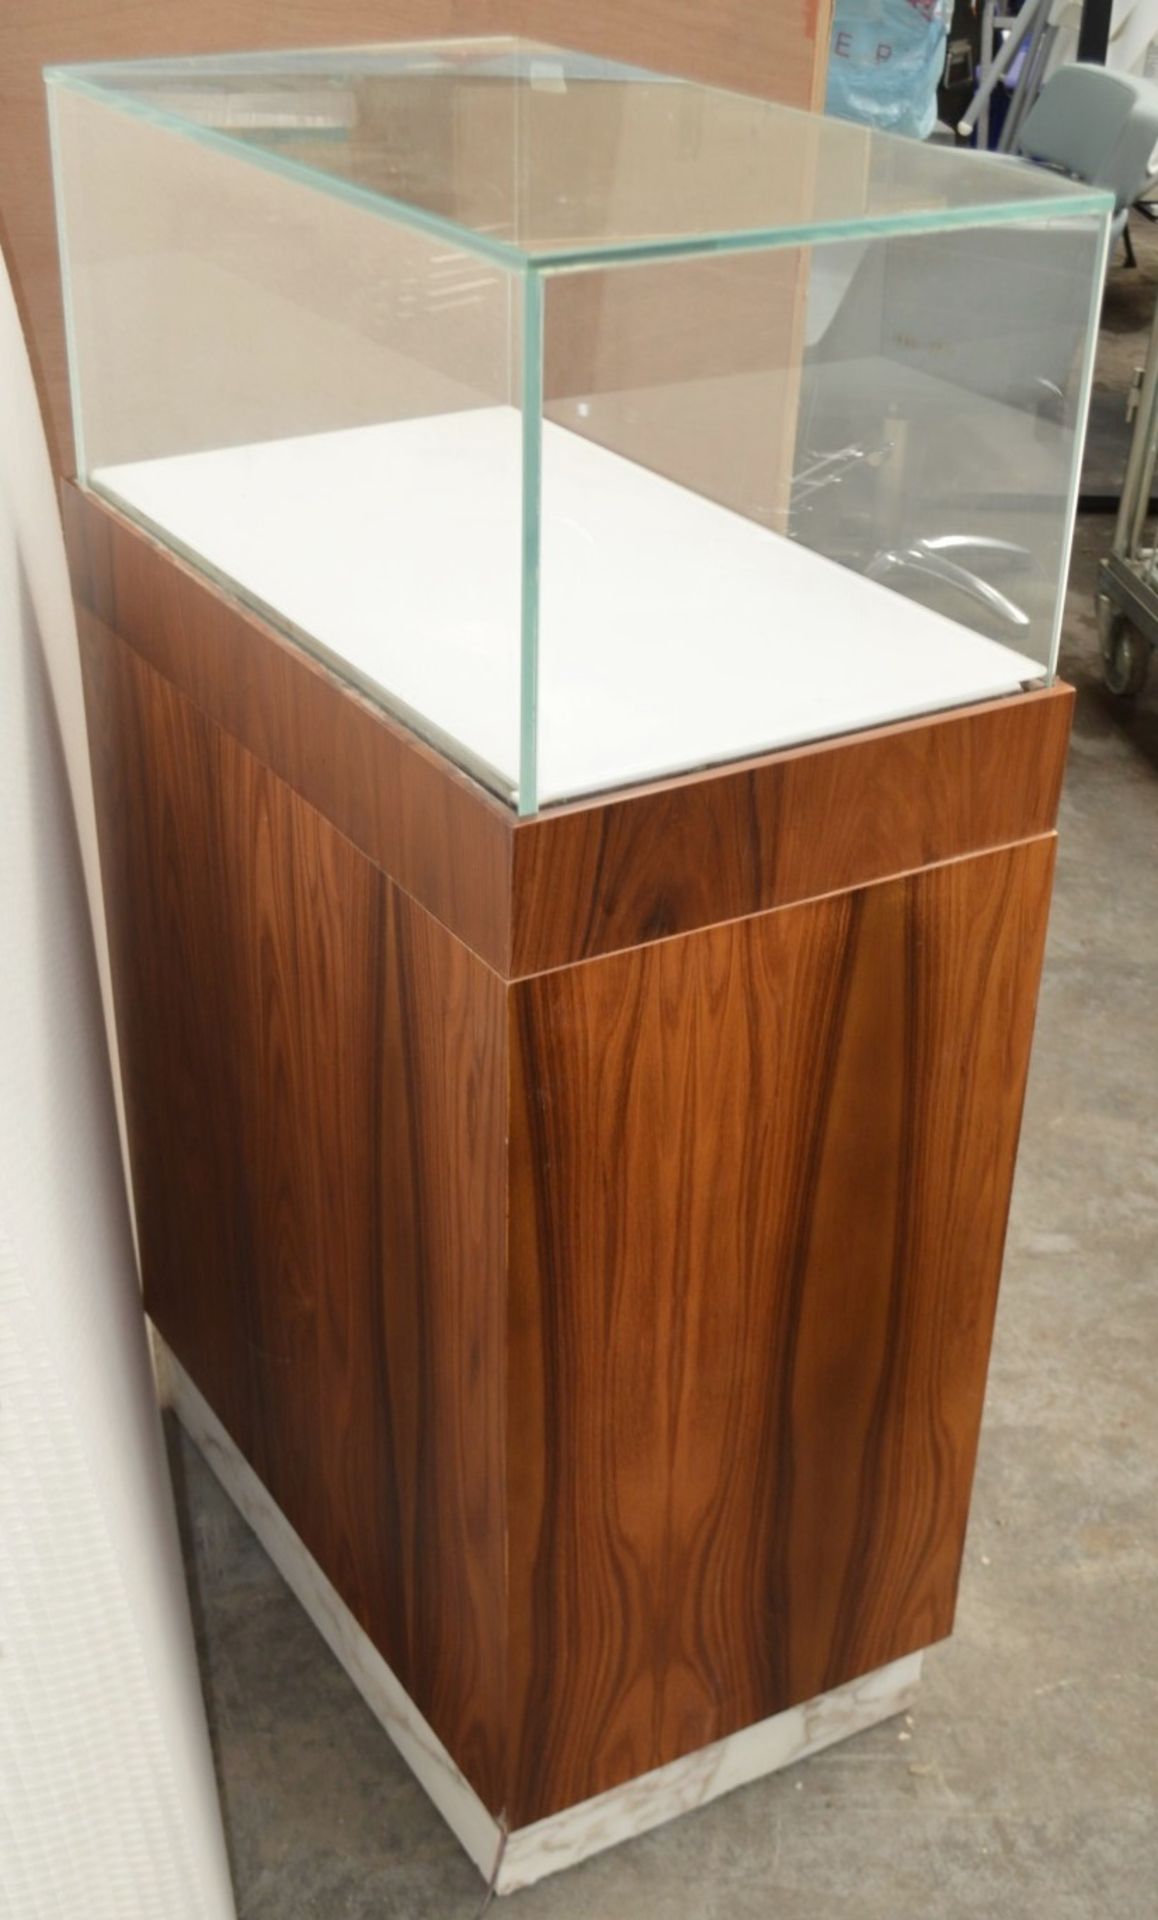 1 x 2-Door Jewellery Display Unit With Slide-apart Glass Top - Dimensions: H120 x W70 x D40cm - Ref: - Image 5 of 6